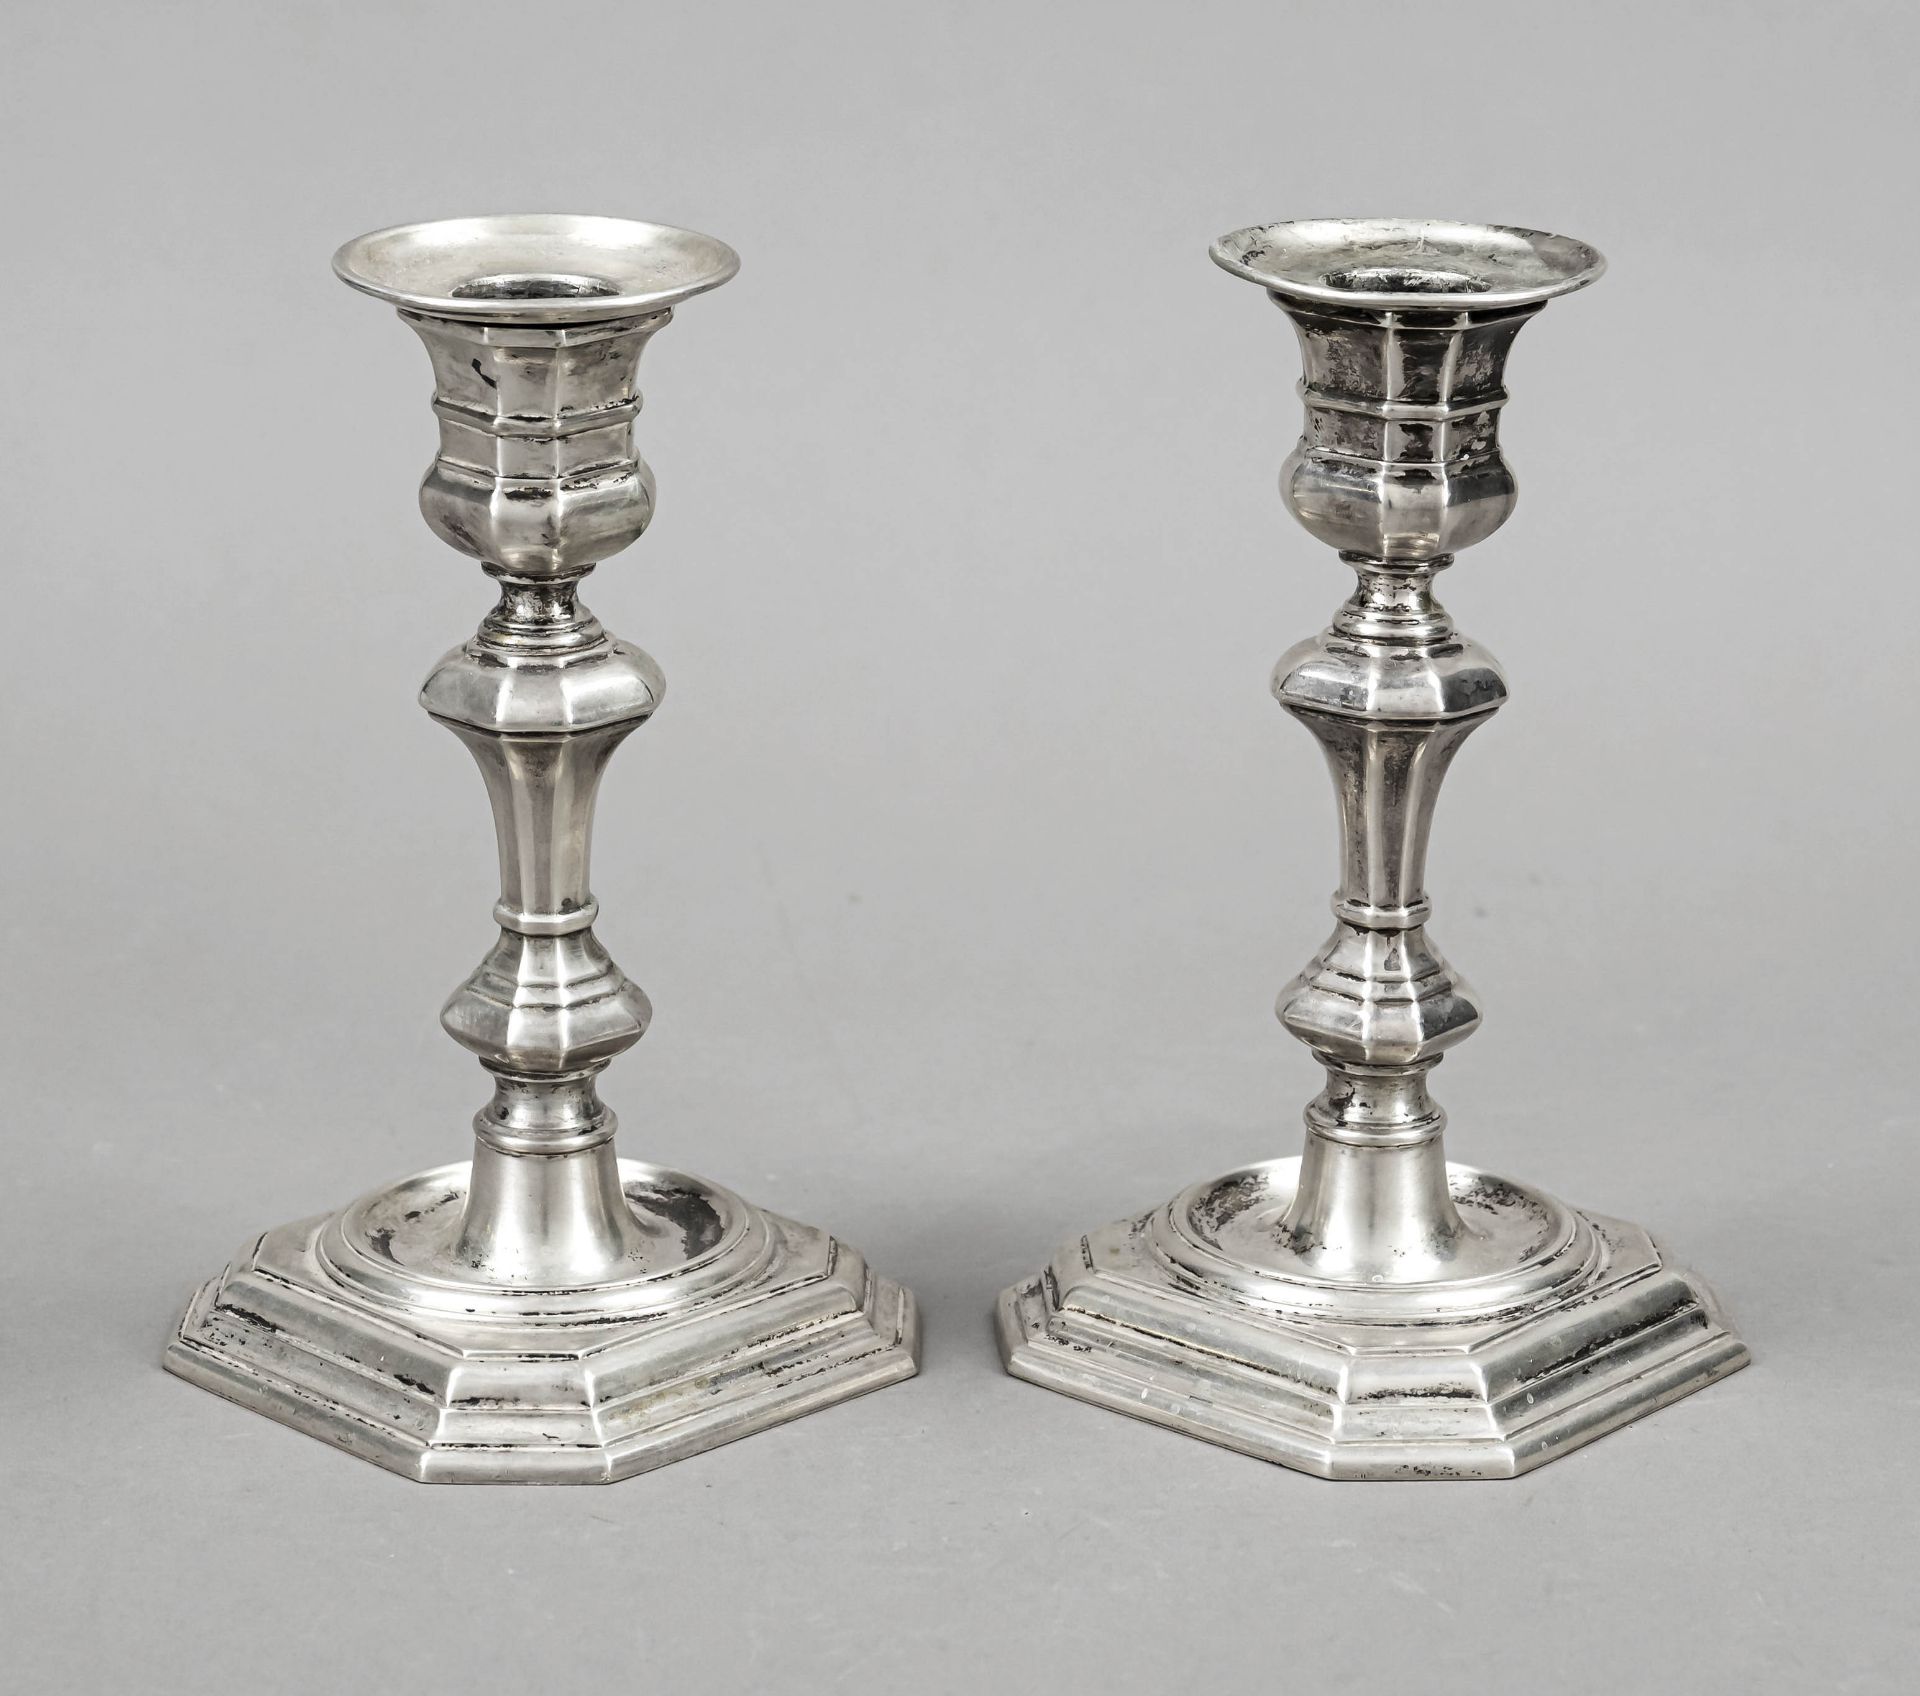 Pair of candlesticks, Italy, early 20th century, maker's mark Ricci & C. S.p.A., Alessandria, silver